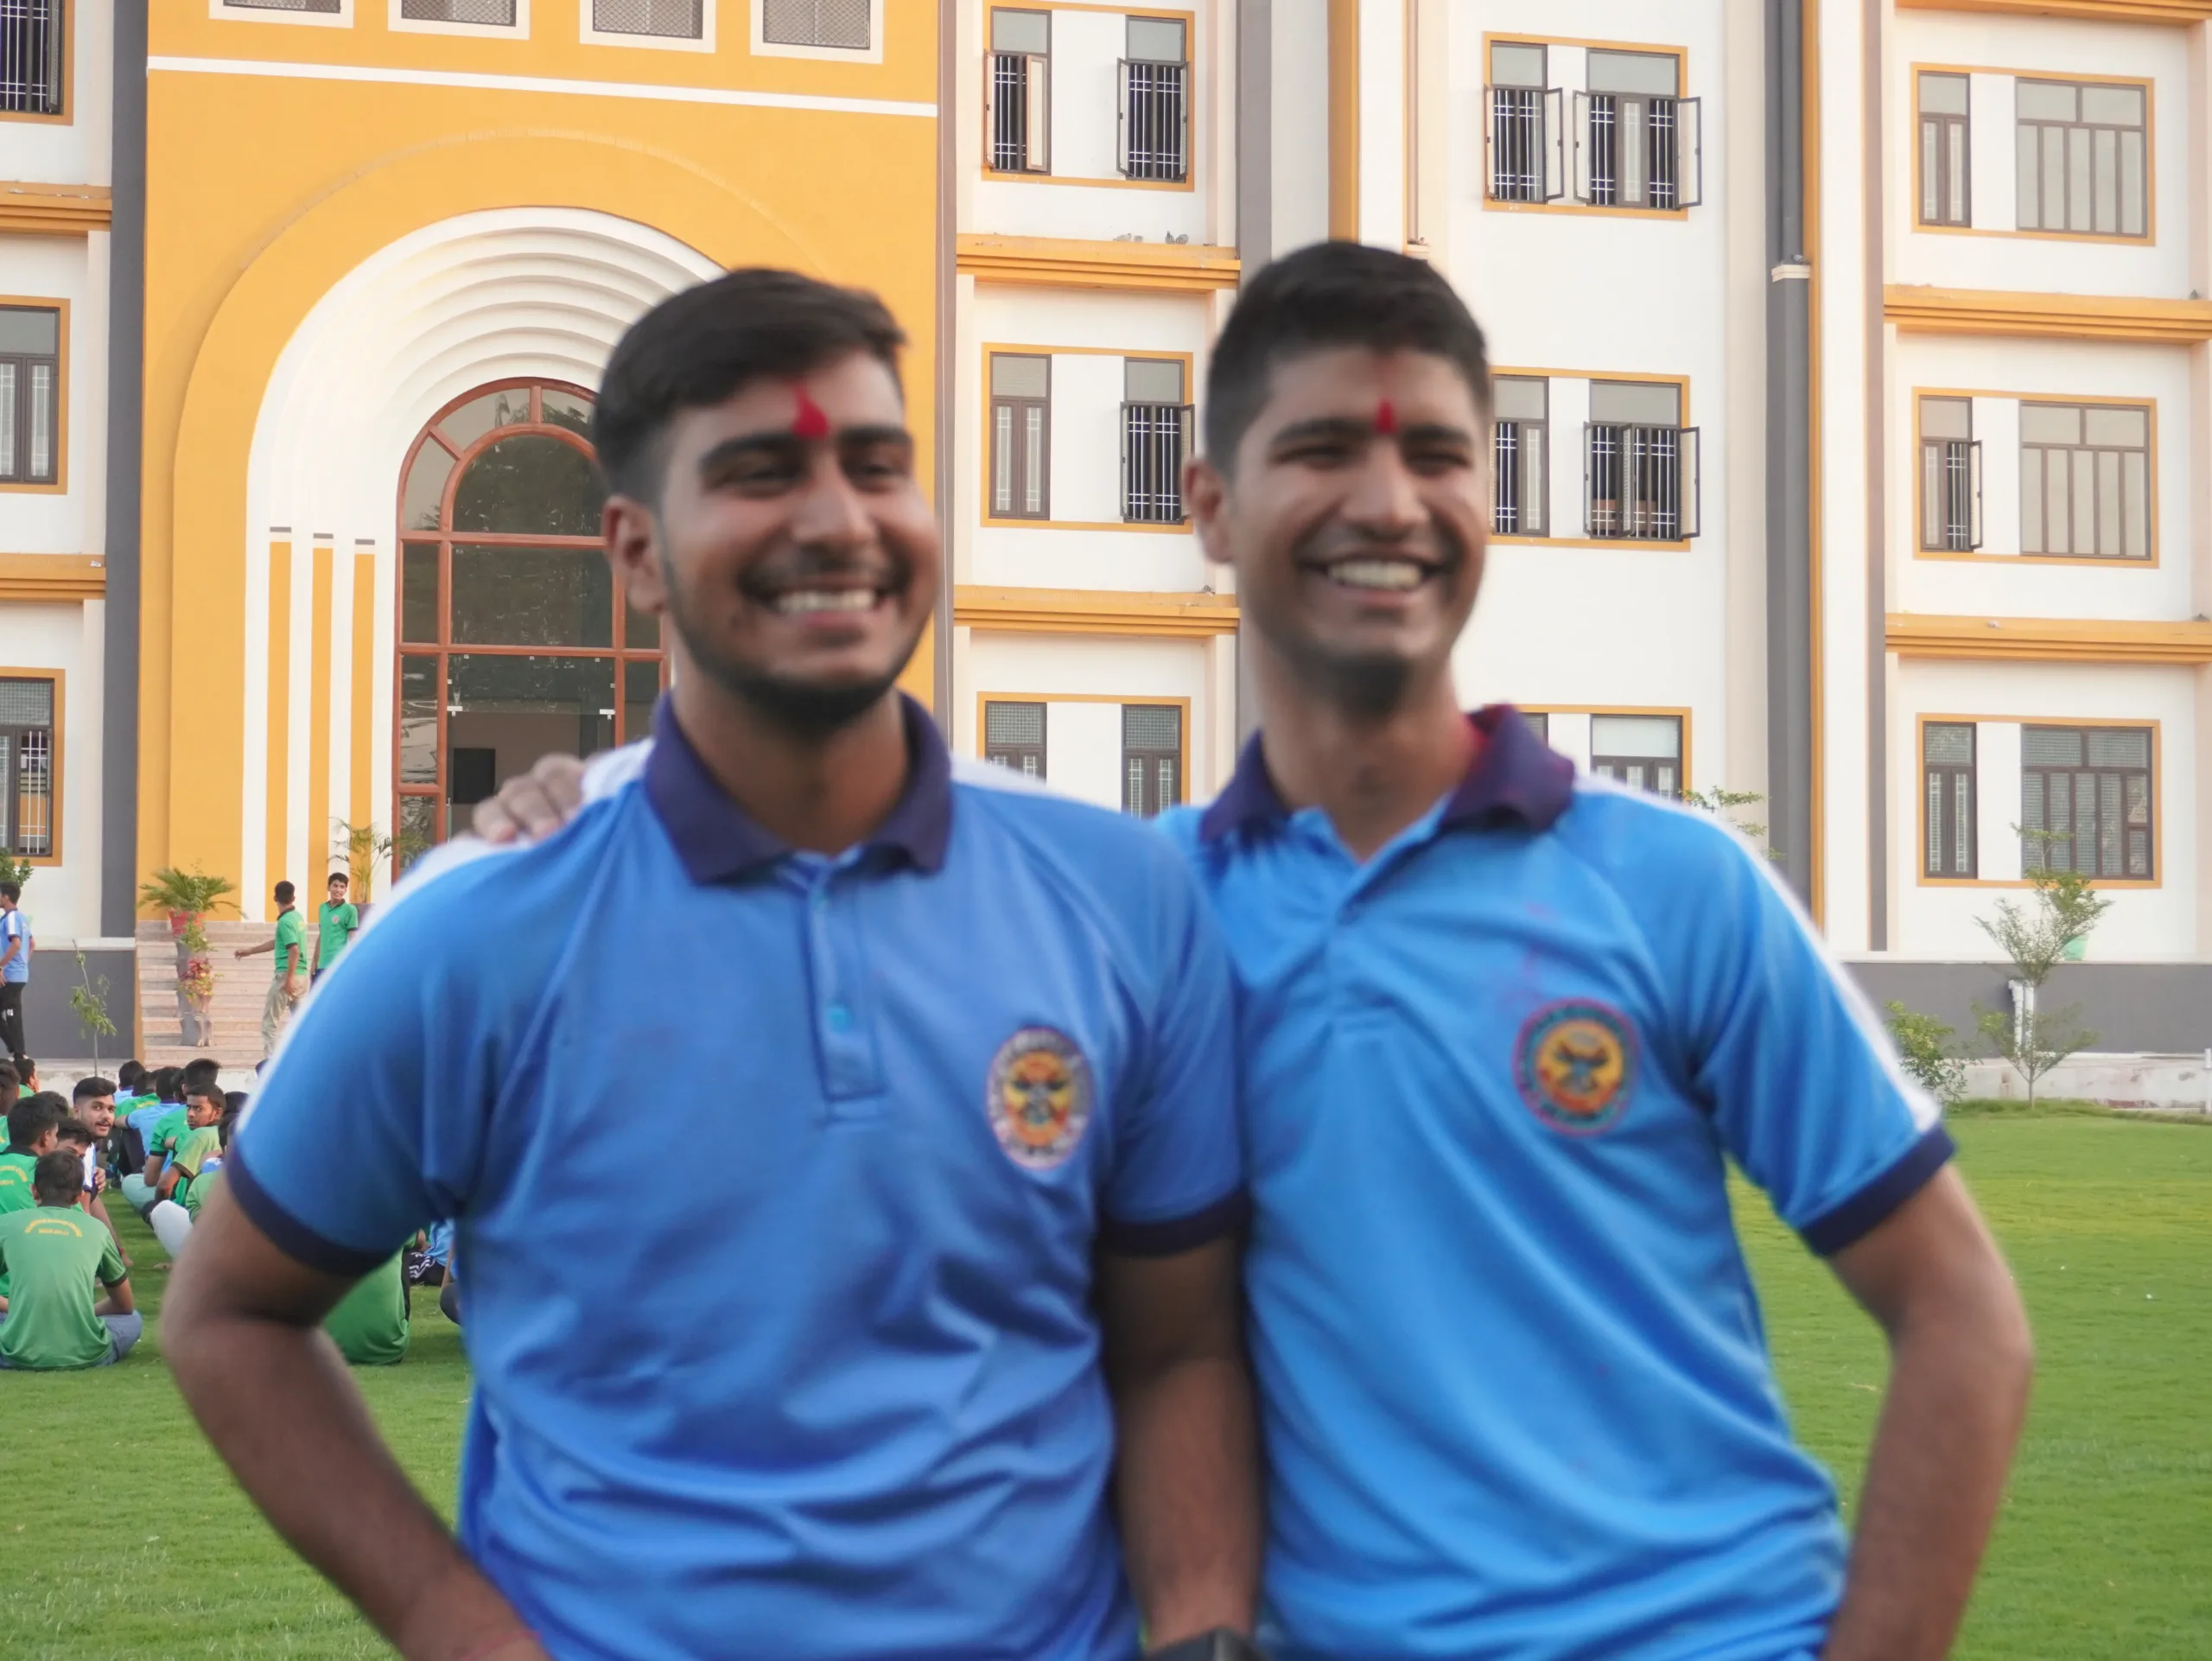 two happy boy are in blue t-shirt are standing in front of a building after success